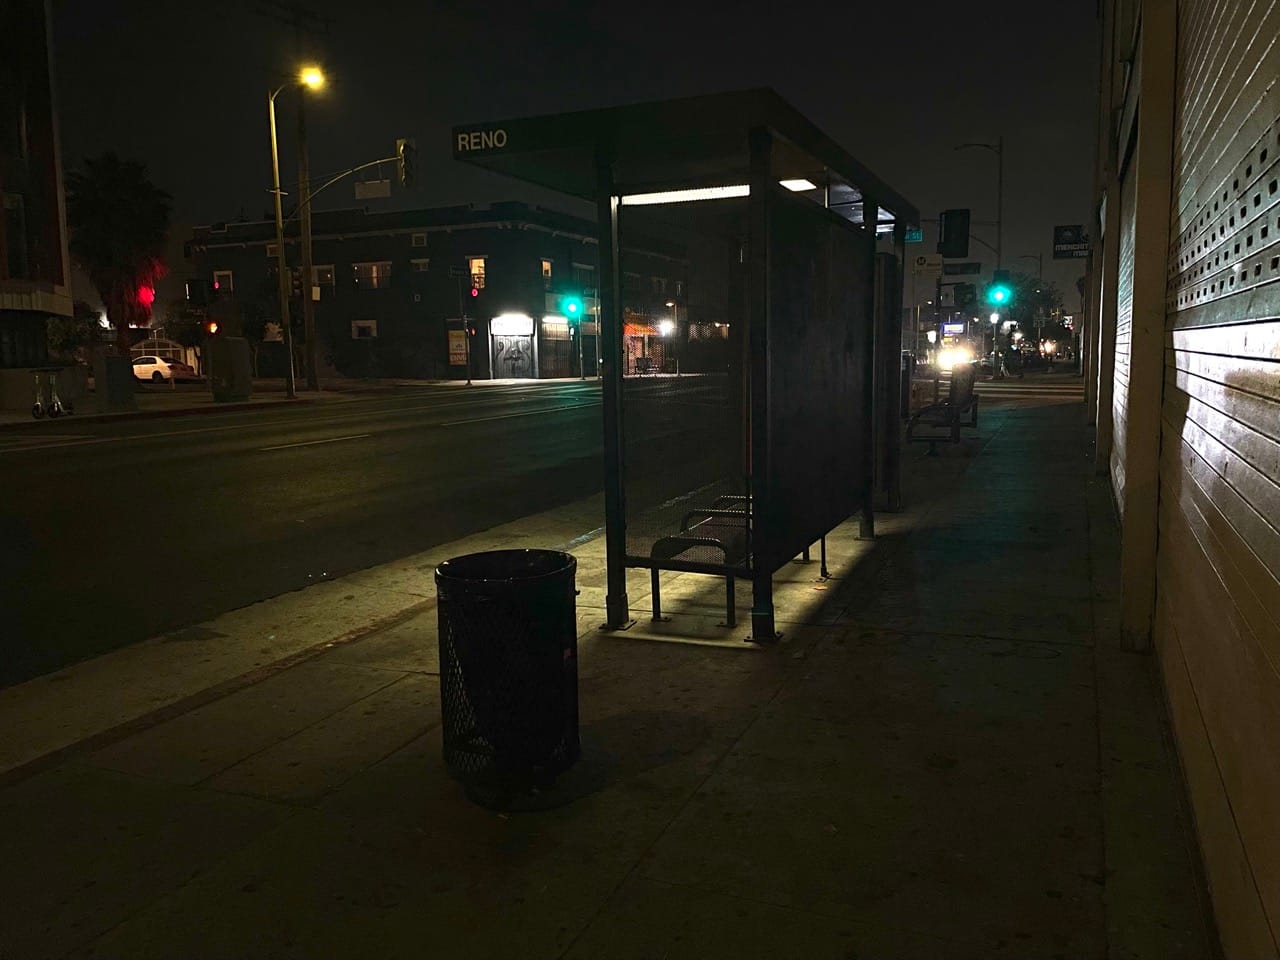 A very dark bus stop on an empty street with a bus shelter providing the only light. Two streetlights are dark as well